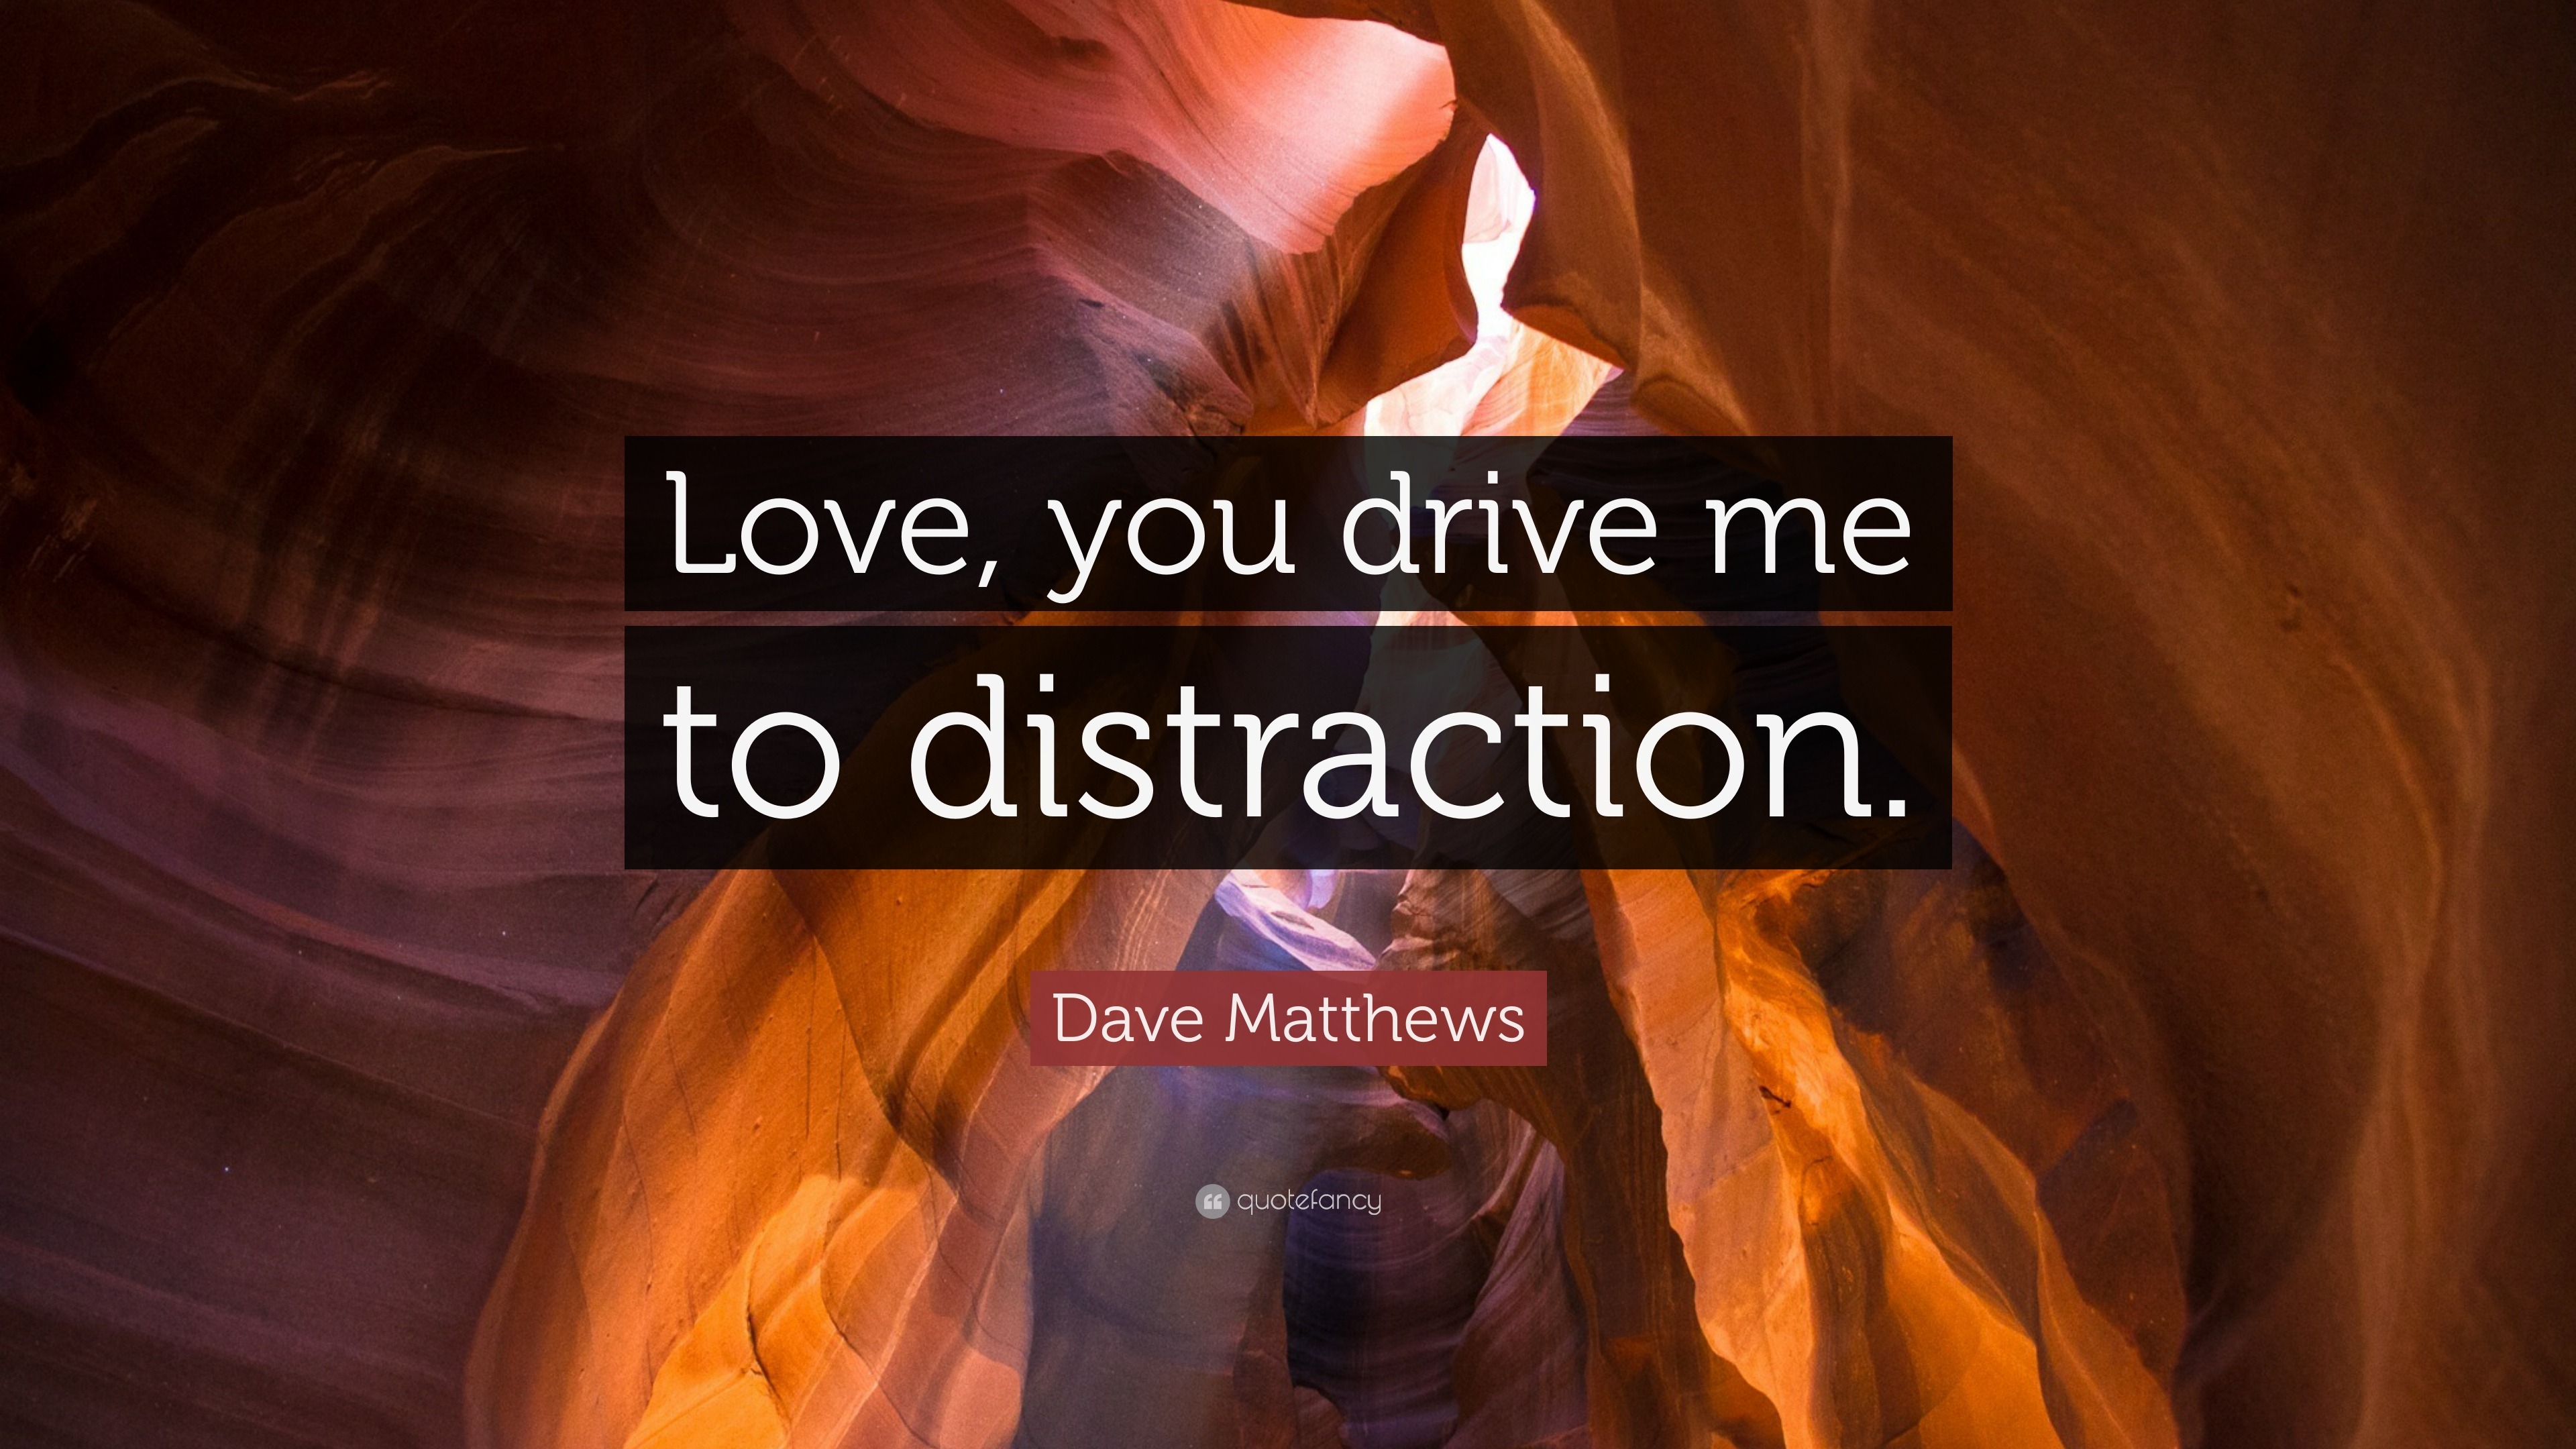 Dave Matthews Quote: "Love, you drive me to distraction." (9 wallpapers) - Quotefancy